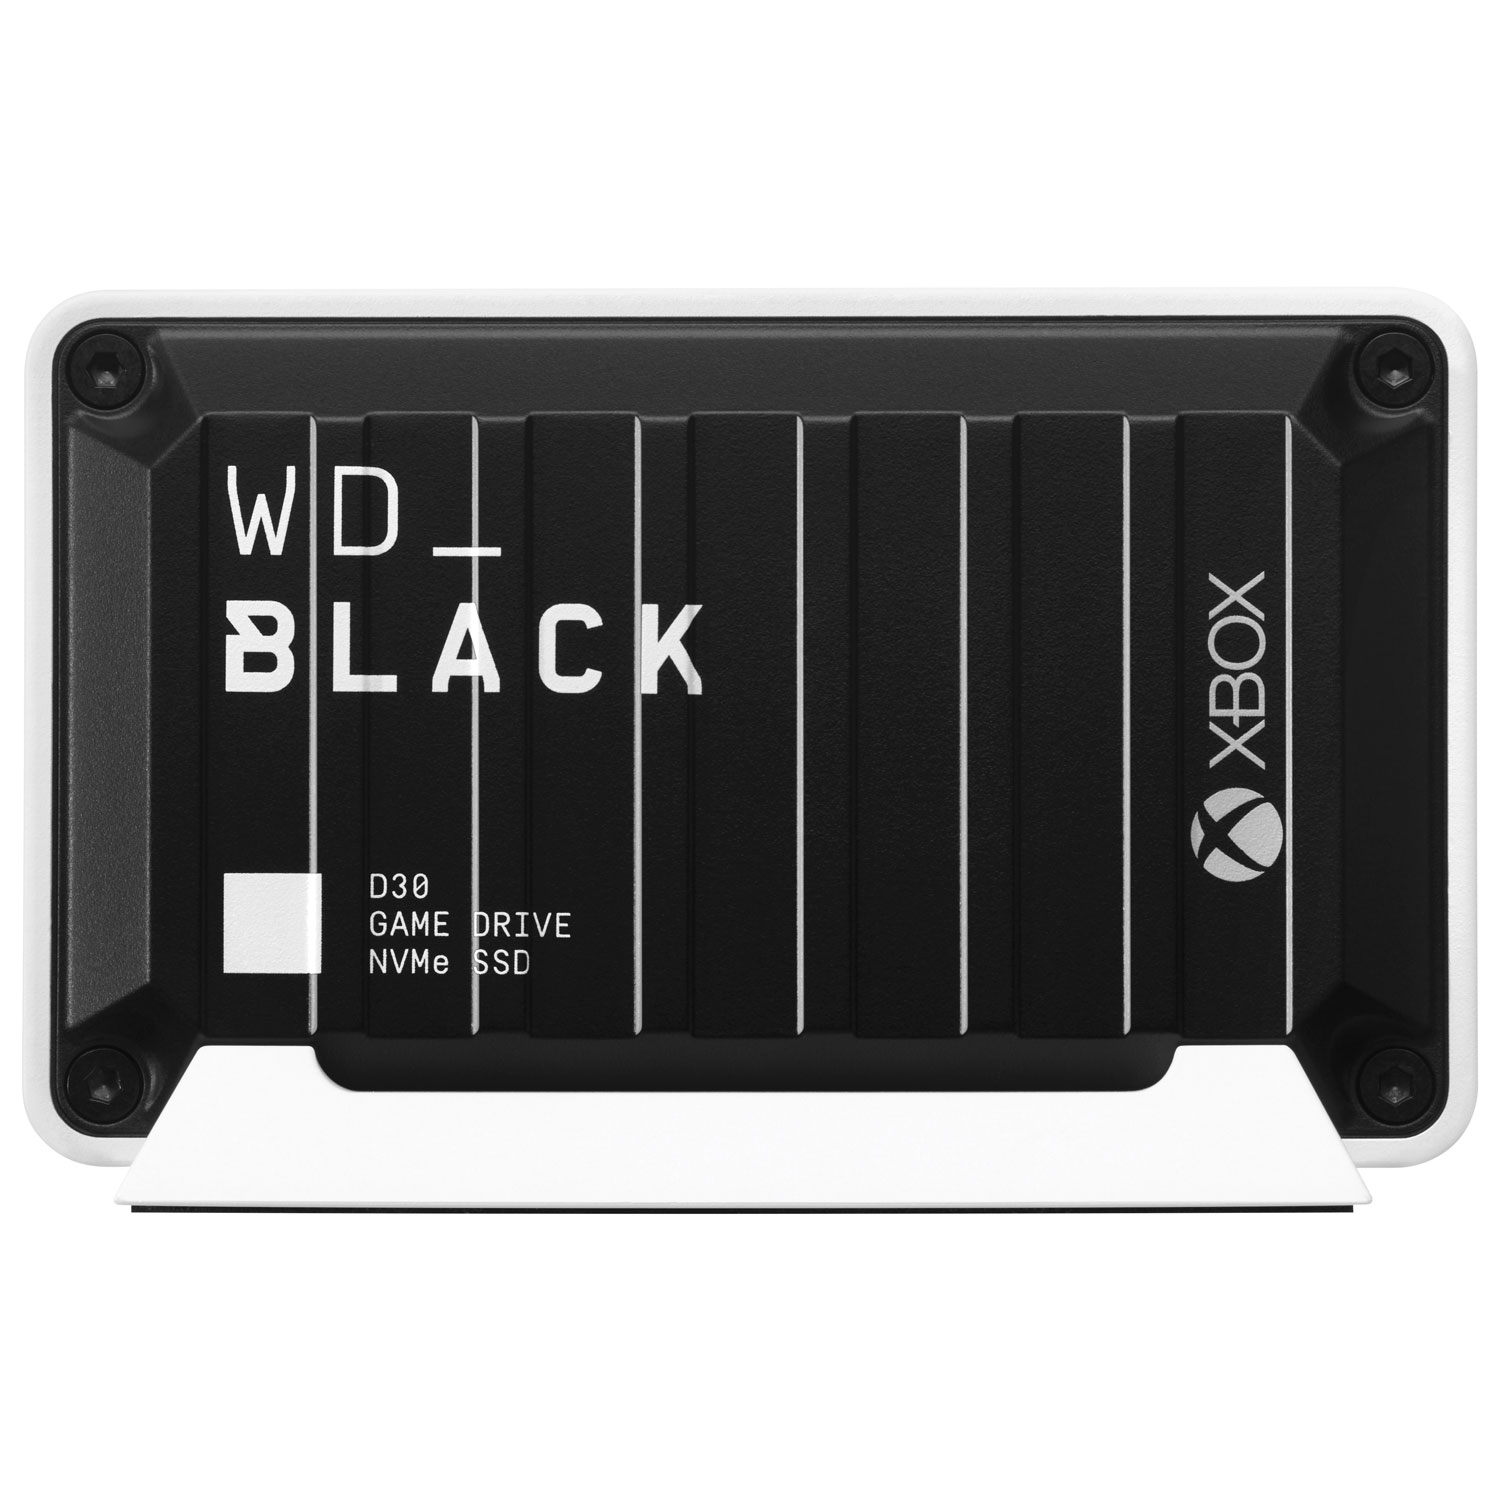 WD_Black D30 Game Drive 2TB USB-C External Solid State Drive for Xbox (WDBAMF0020BBW-WESN)